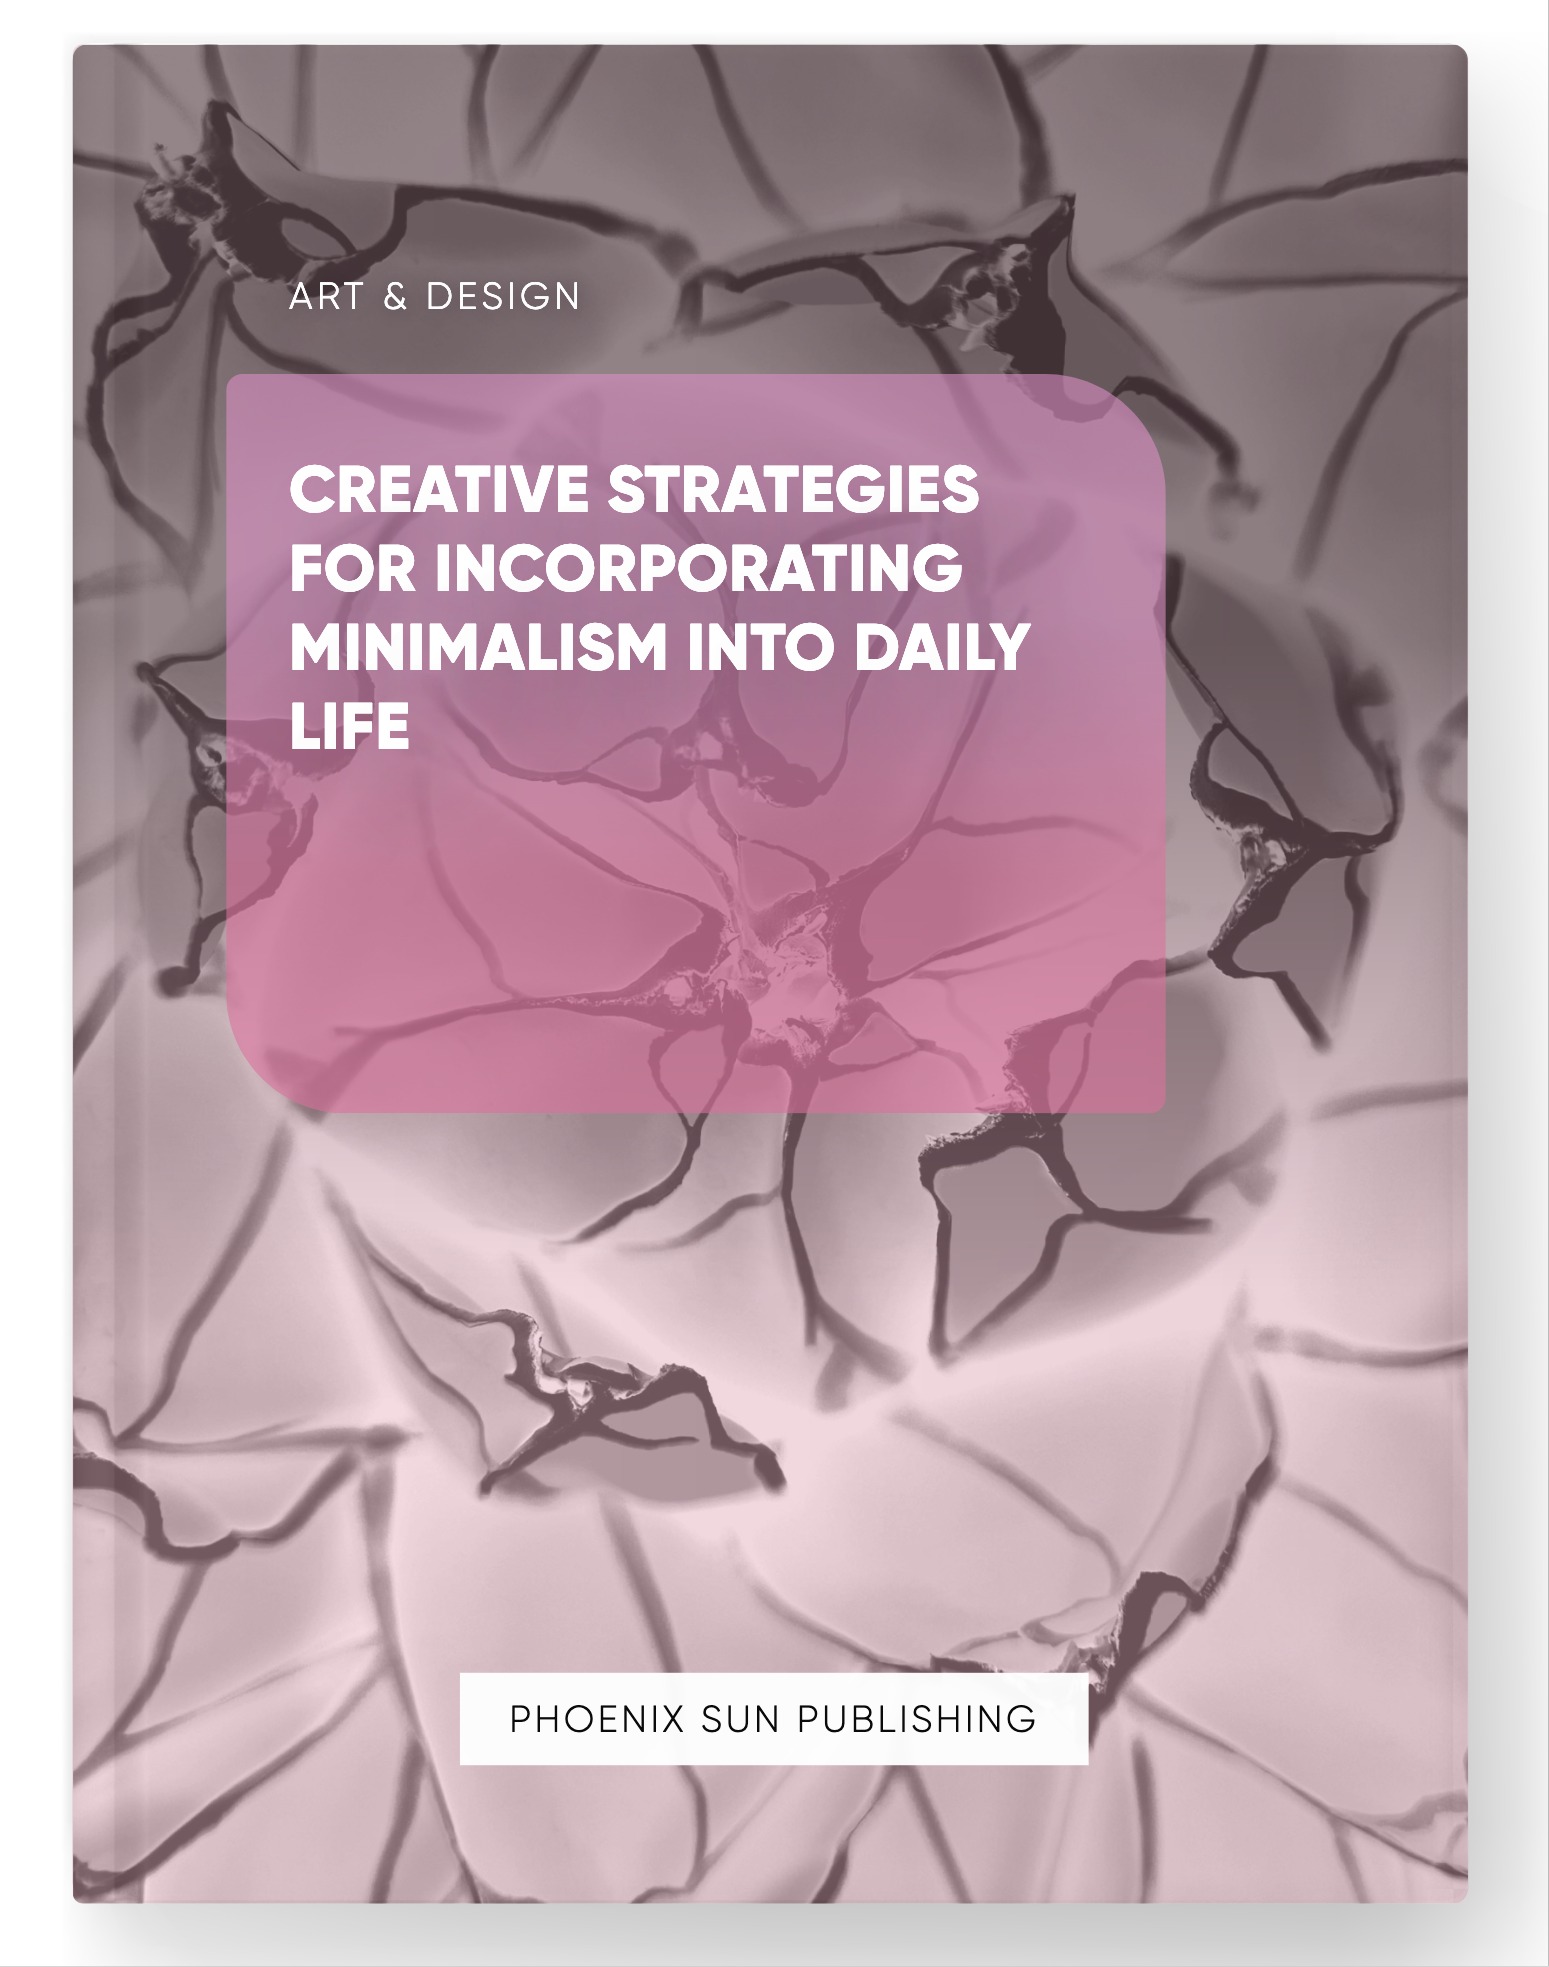 Creative Strategies for Incorporating Minimalism into Daily Life